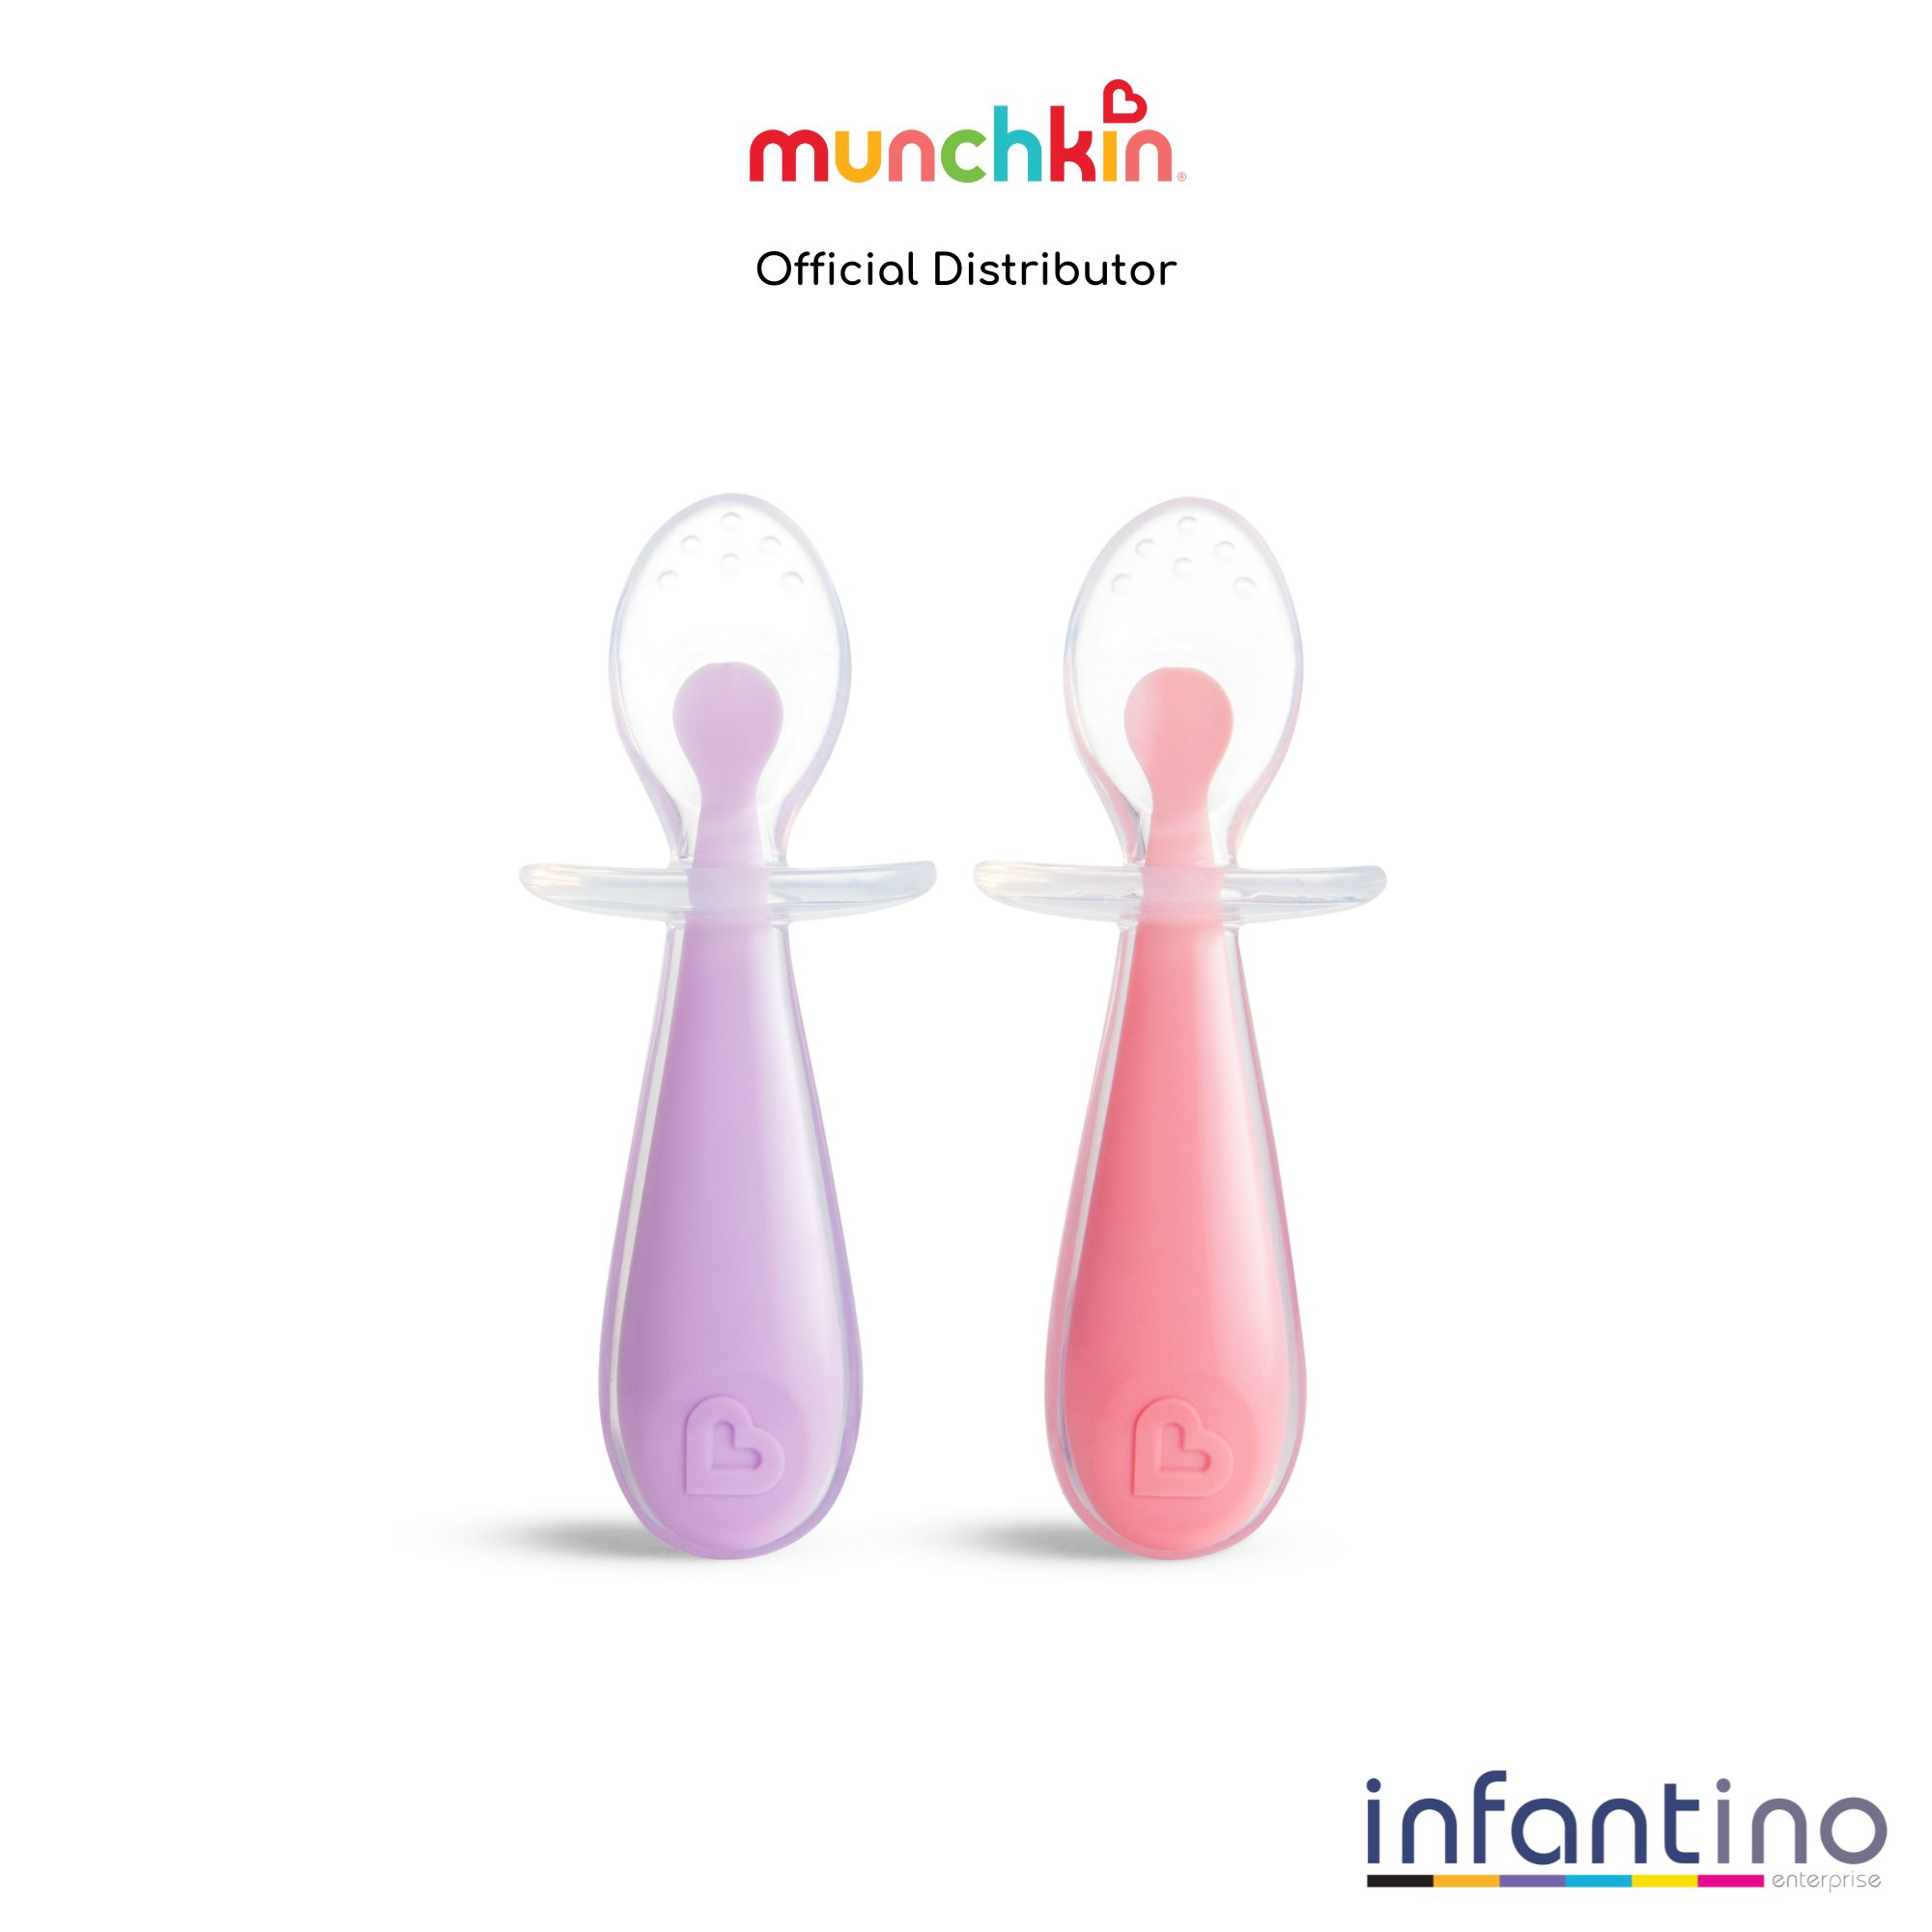 Munchkin Gentle Scoop Silicone Training Spoons, 2 Pack in Pink/Purple